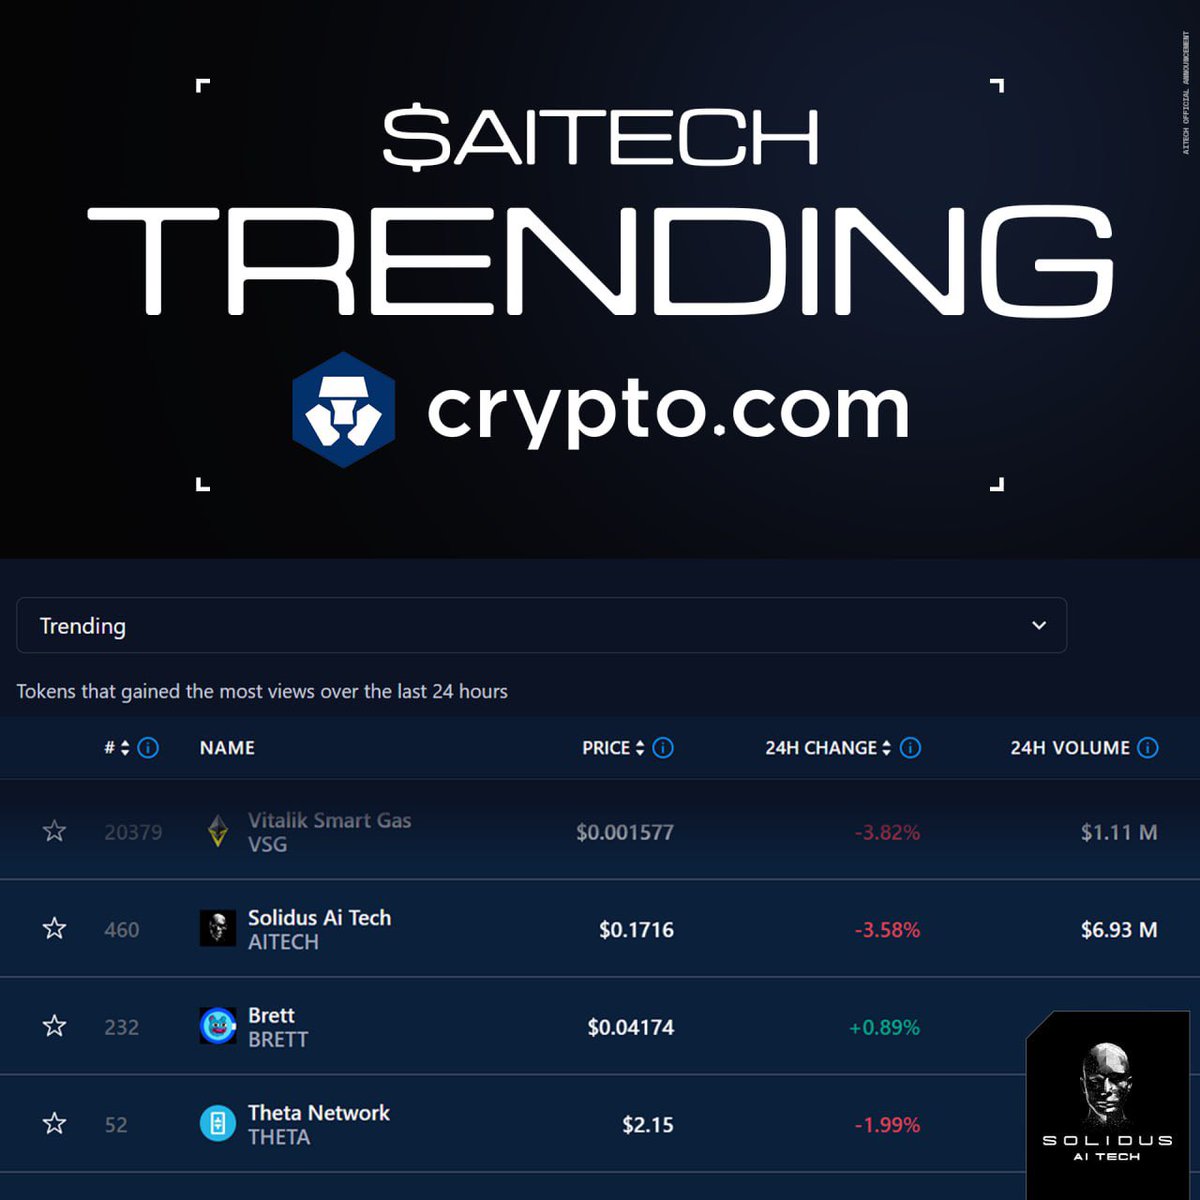 🔥 $AITECH Trends on Crypto.com!

📈 We are thrilled to share that AITECH is trending on crypto.com, making it one of the standout AI projects on the rank chart.

👀 Take a look: crypto.com/price/showroom…